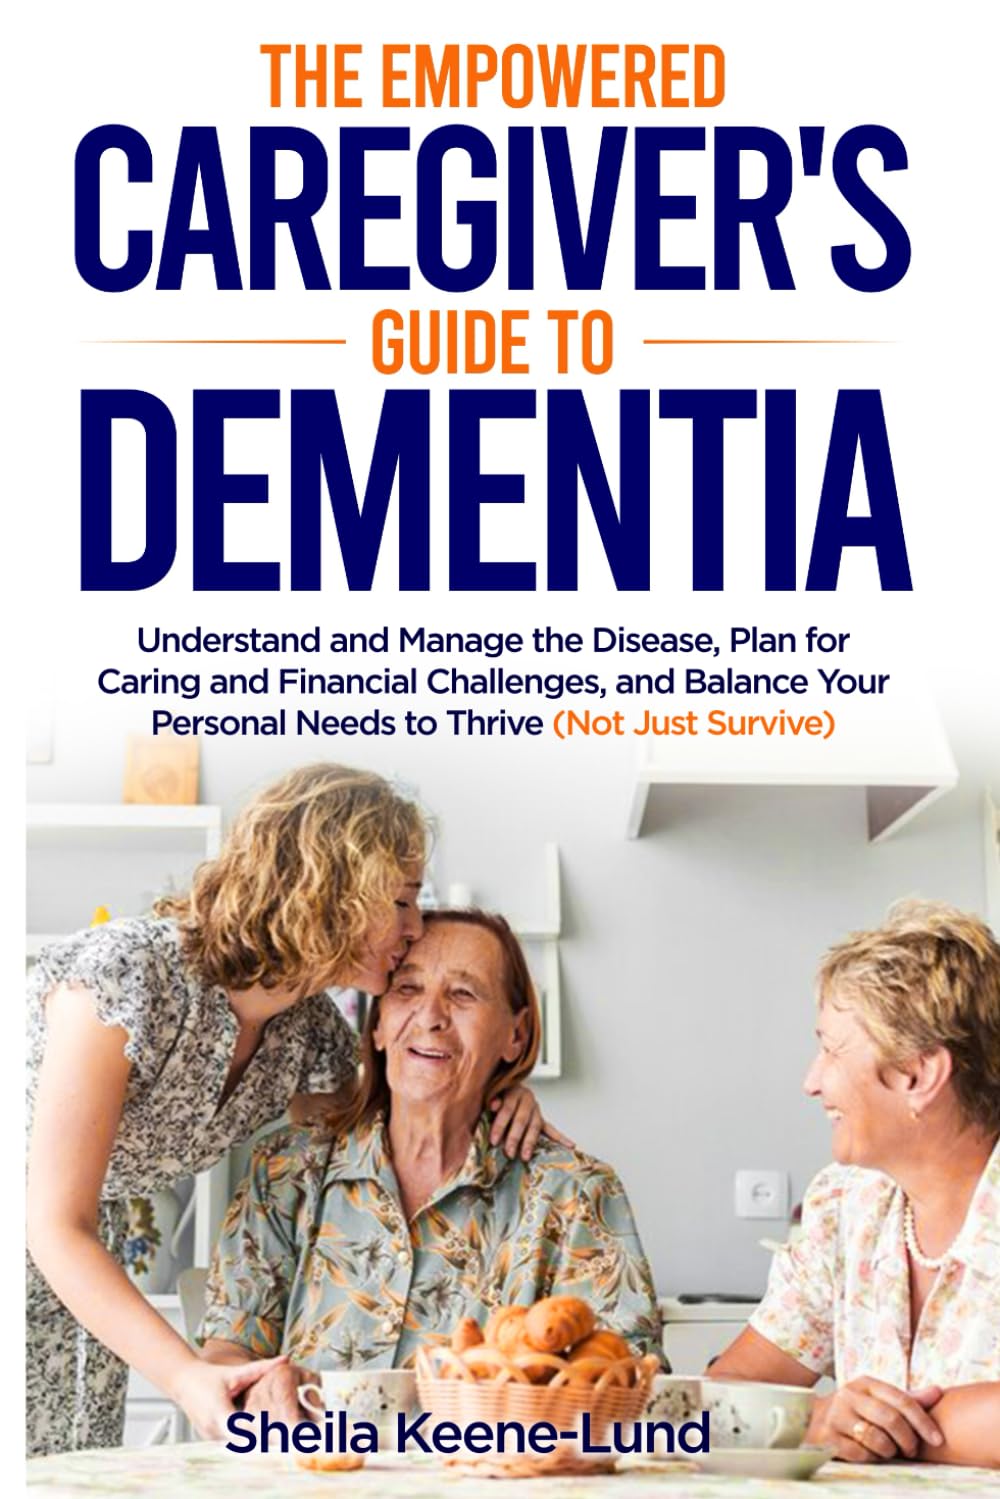 The Empowered Caregiver's Guide to Dementia: Understand and Manage the Disease, Plan for Caring and Financial Challenges, and Balance Your Personal Needs to Thrive